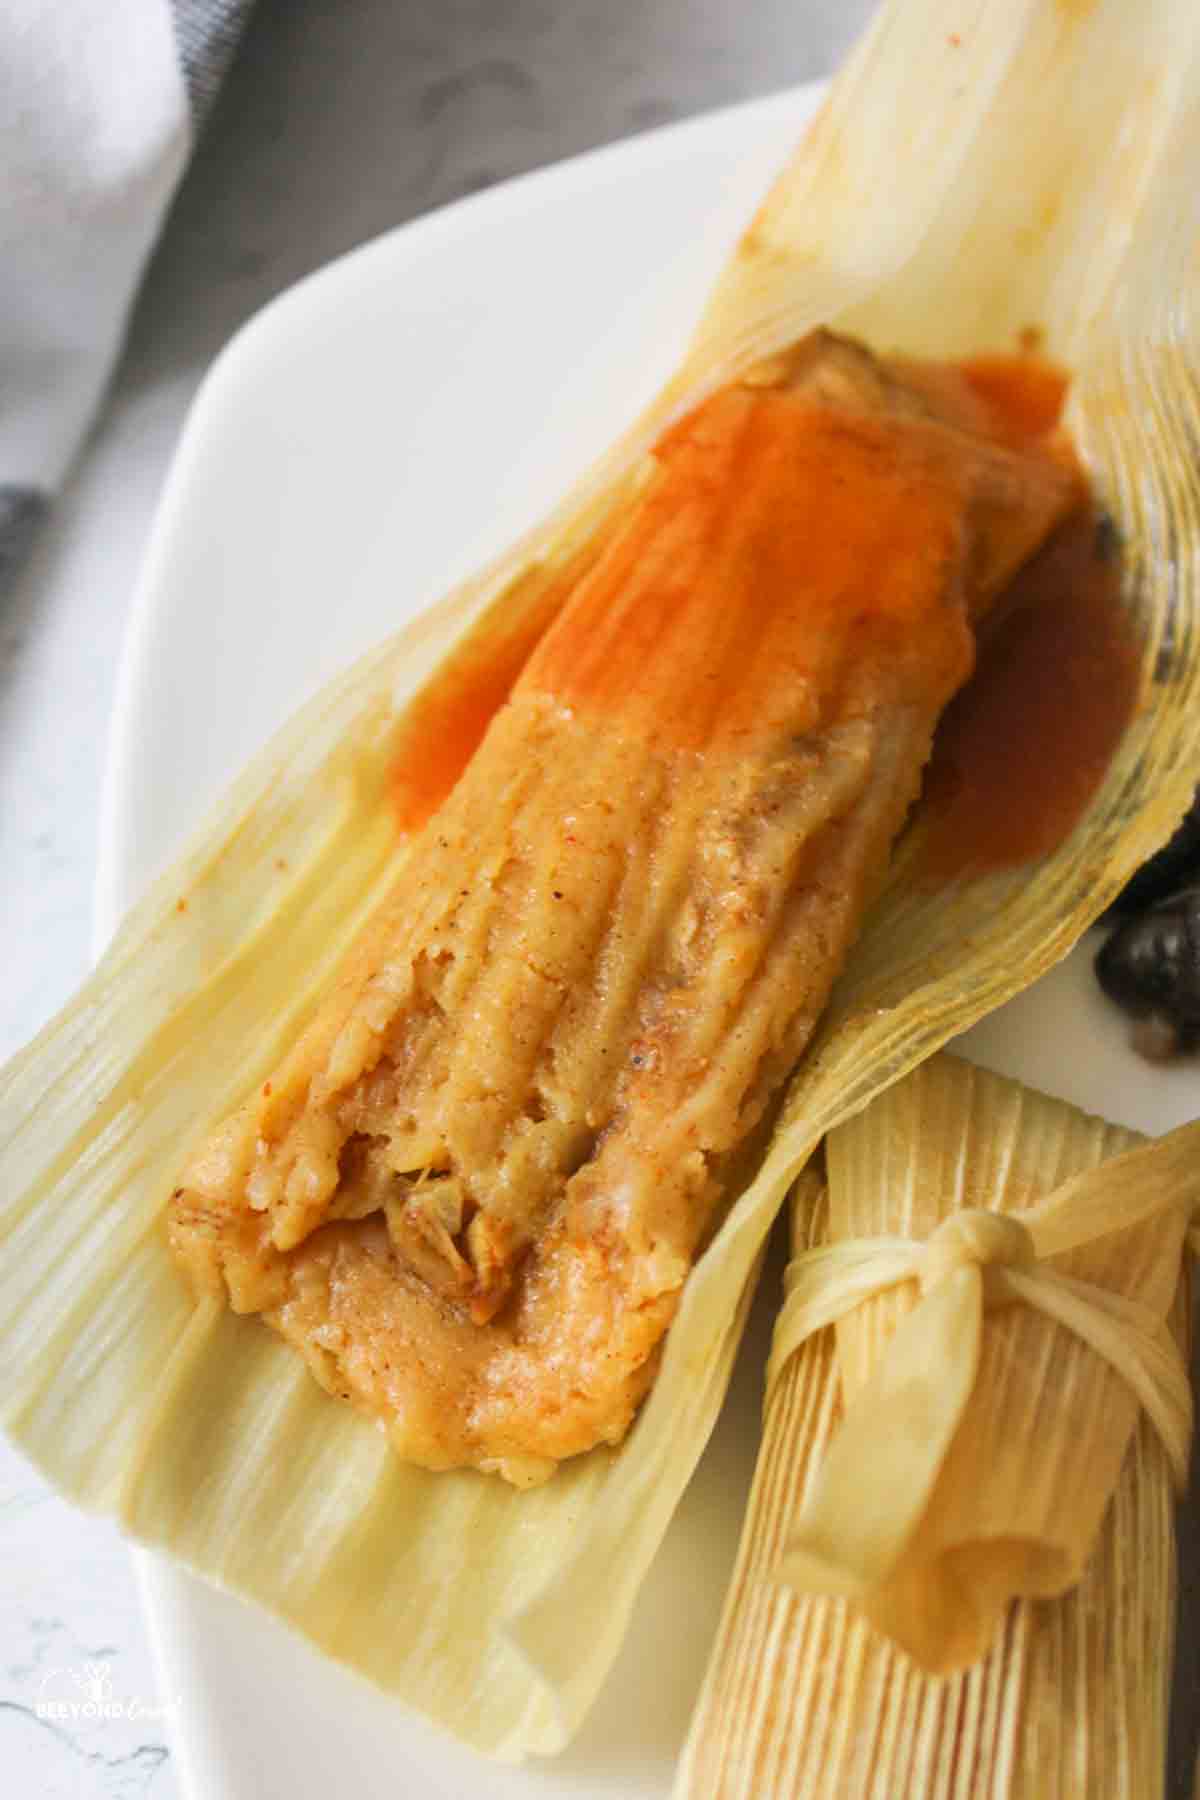 sauce topped turkey tamale on a plate next to a wrapped tamale